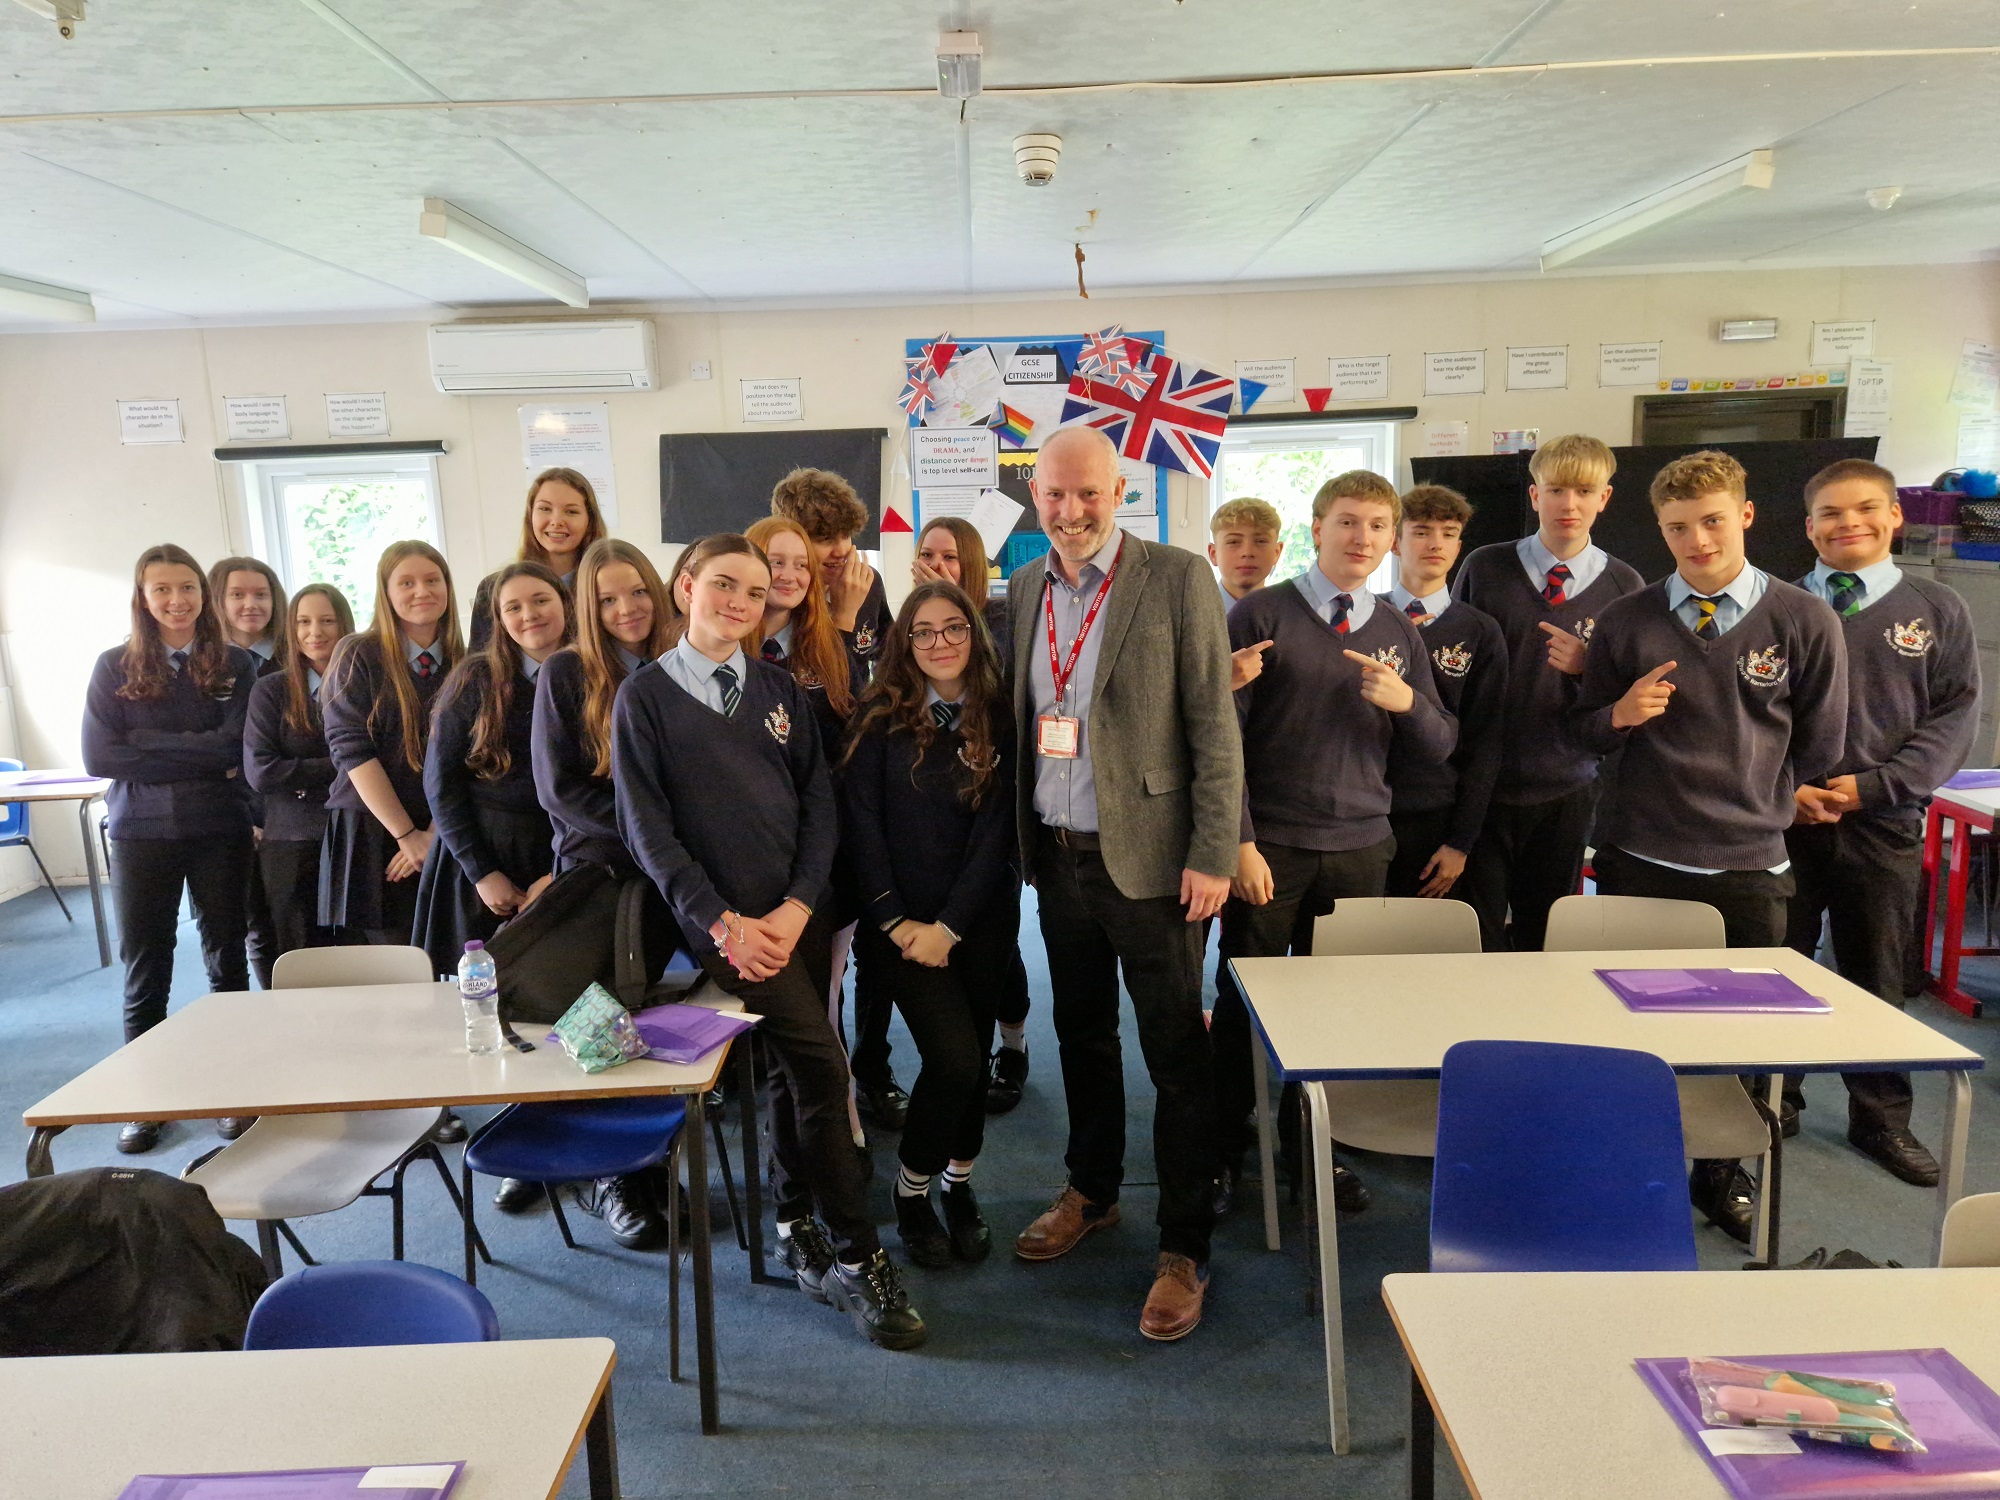 Justin Meets With Highworth Warneford School Following Its Addition To The Park Academy Trust